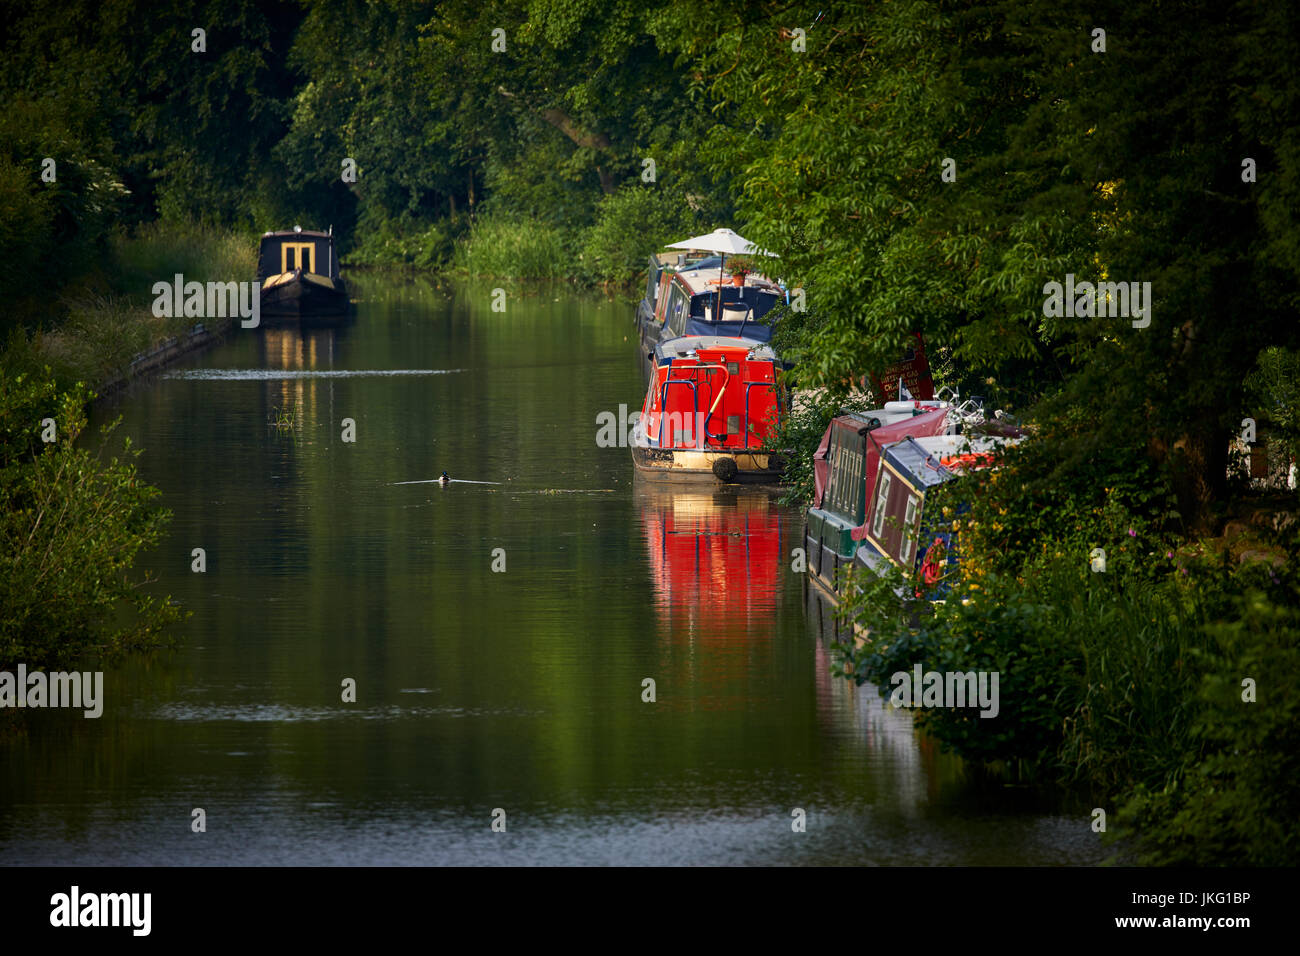 Macclesfield canal , Congleton Town Center, Cheshire Est, Inghilterra. Foto Stock